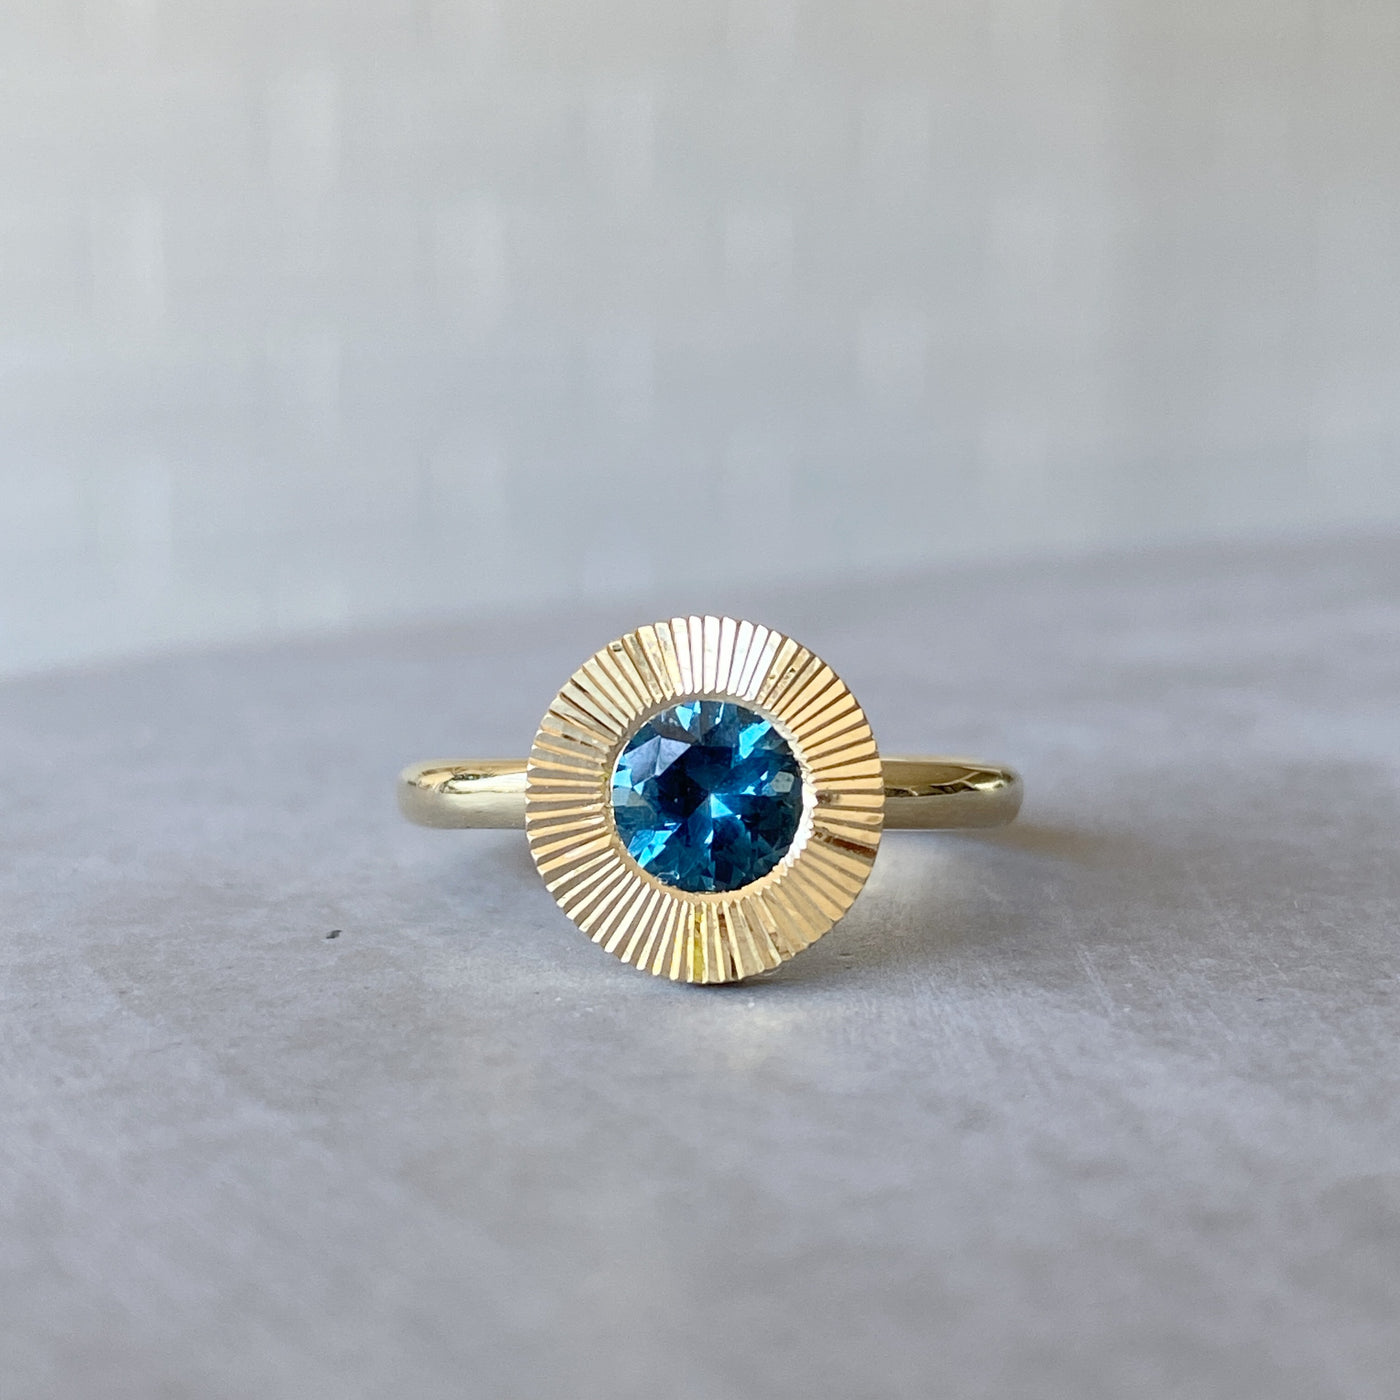 Round Teal Montana sapphire in a 14k yellow gold Aurora ring with an engraved halo border in natural light